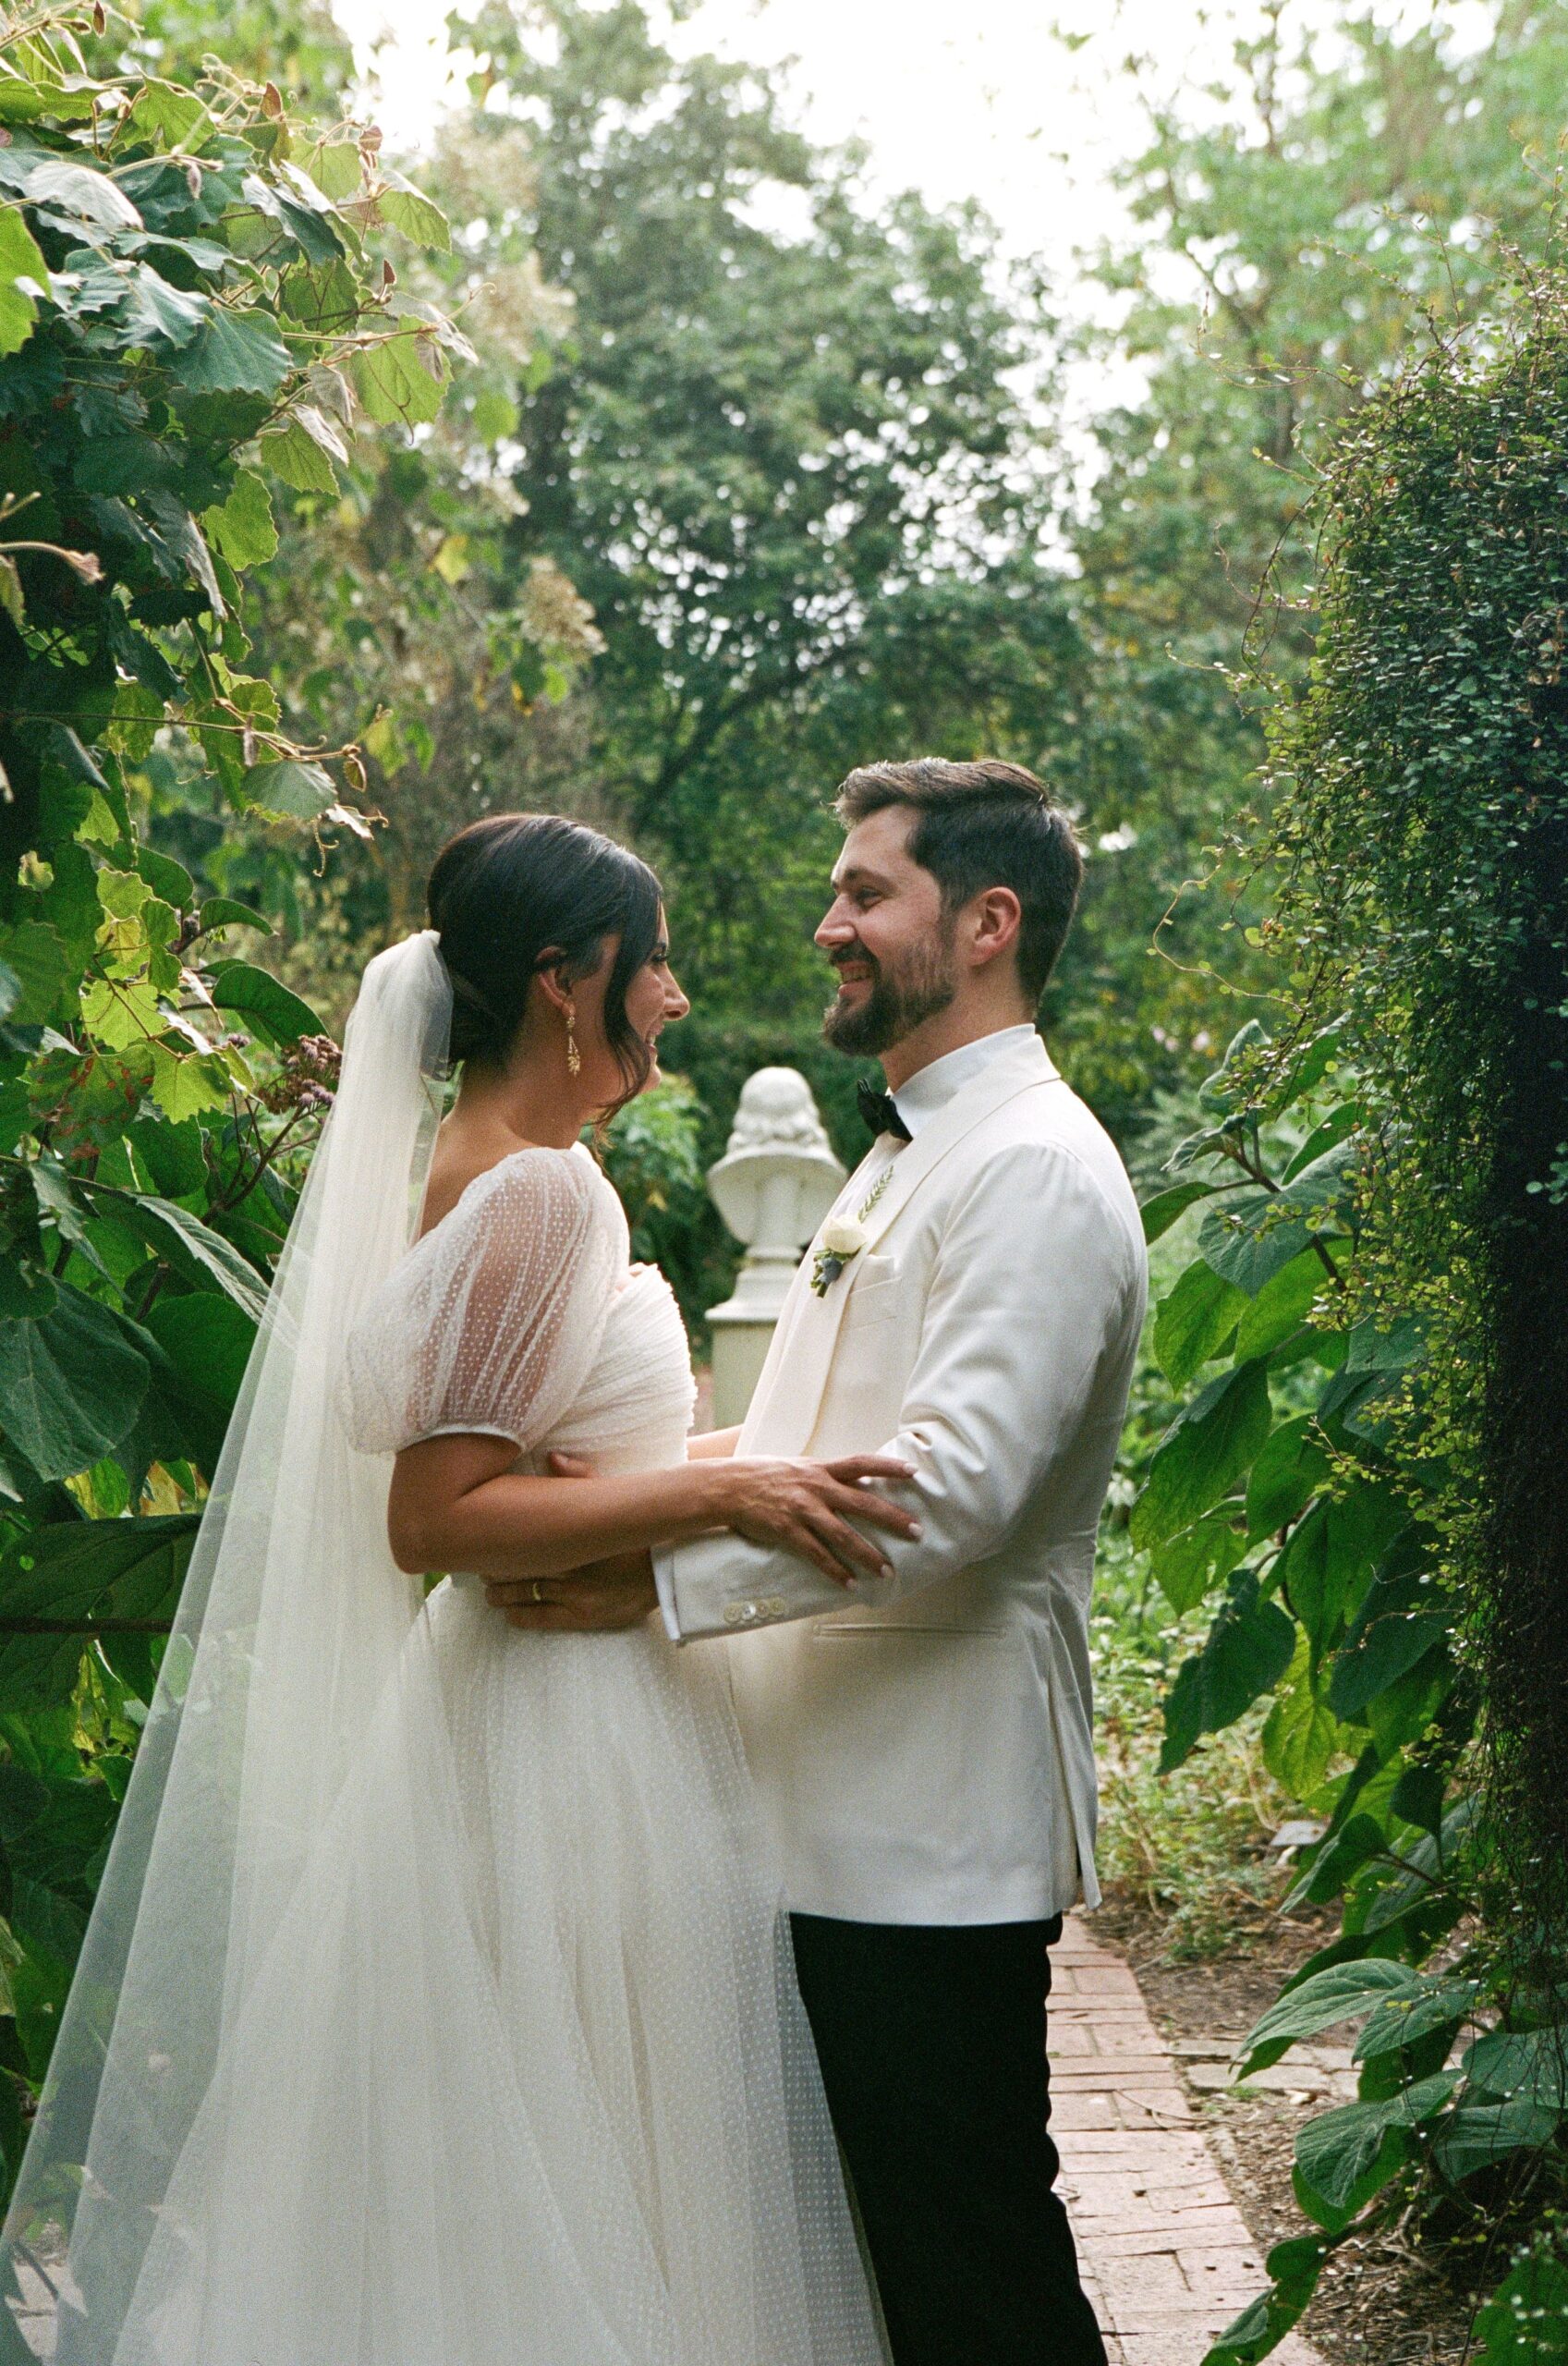 Maddy and Jason holding each other amongst the backdrop of greenery of the botanical gardens